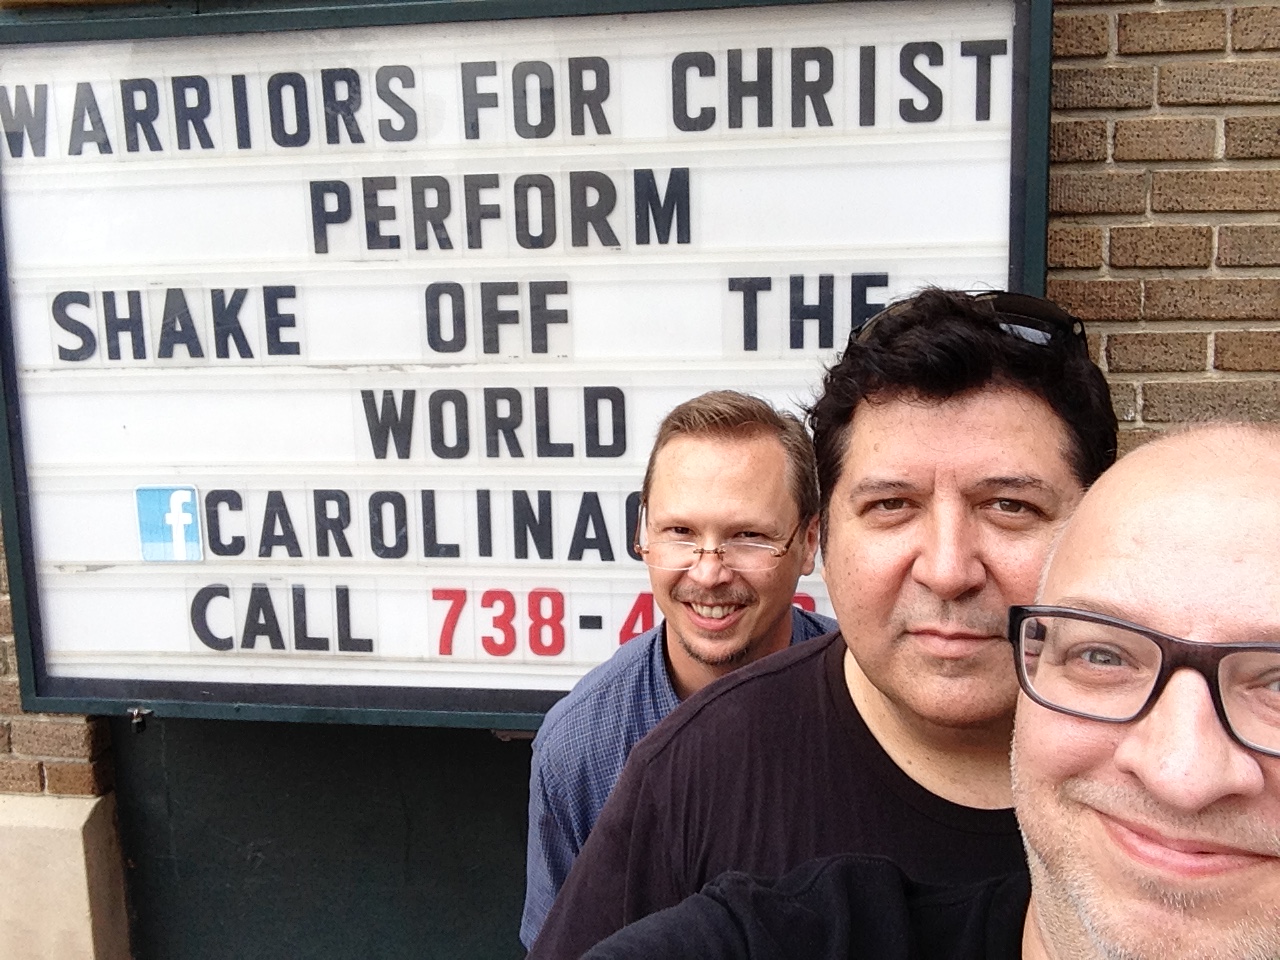 Stephen Donnelly, Chuck Williams and Michael Litty in Lumberton, NC on 9/27/15